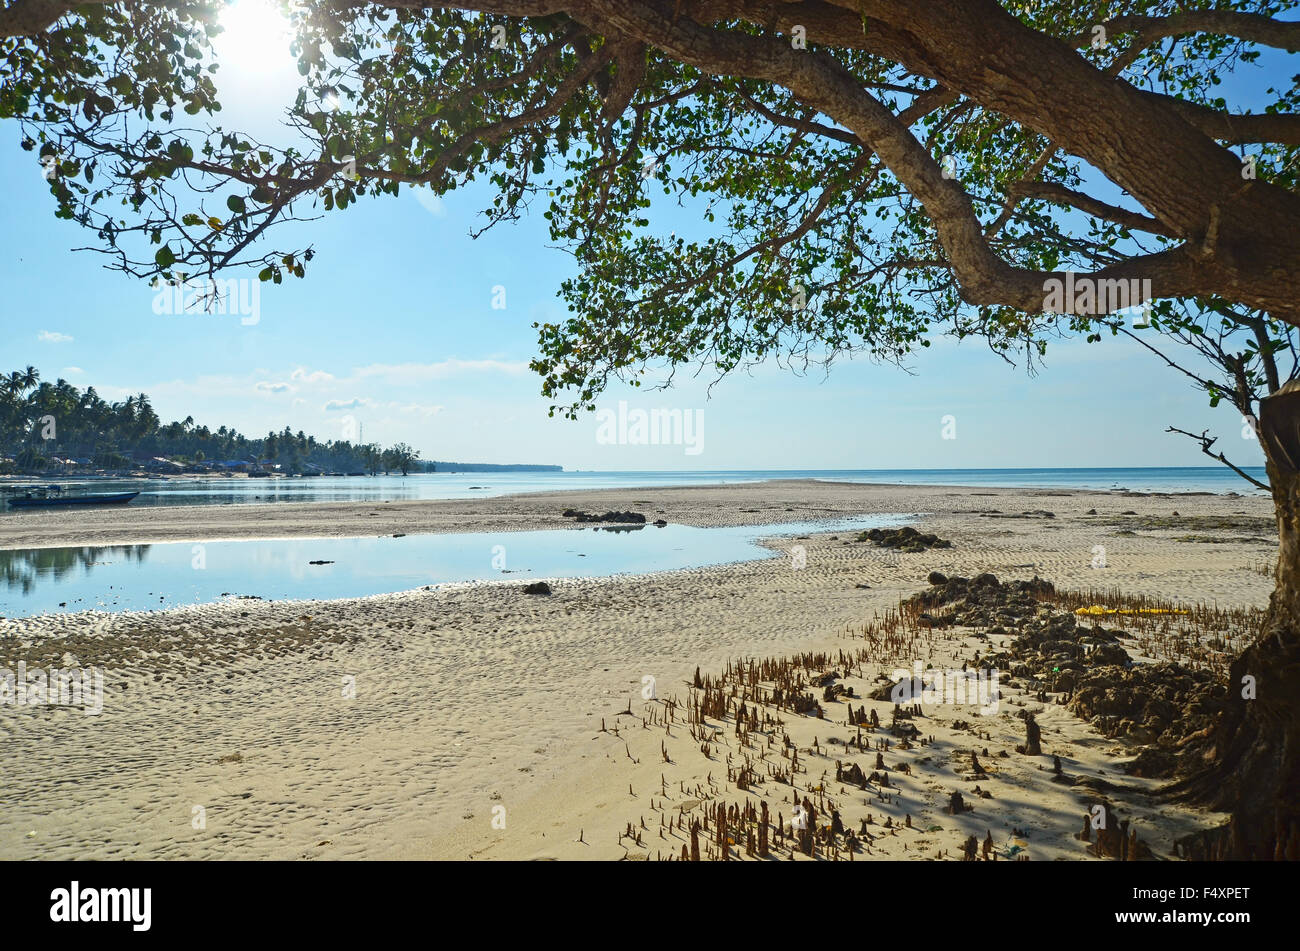 Serene atmosphere under the tree by the beach Stock Photo